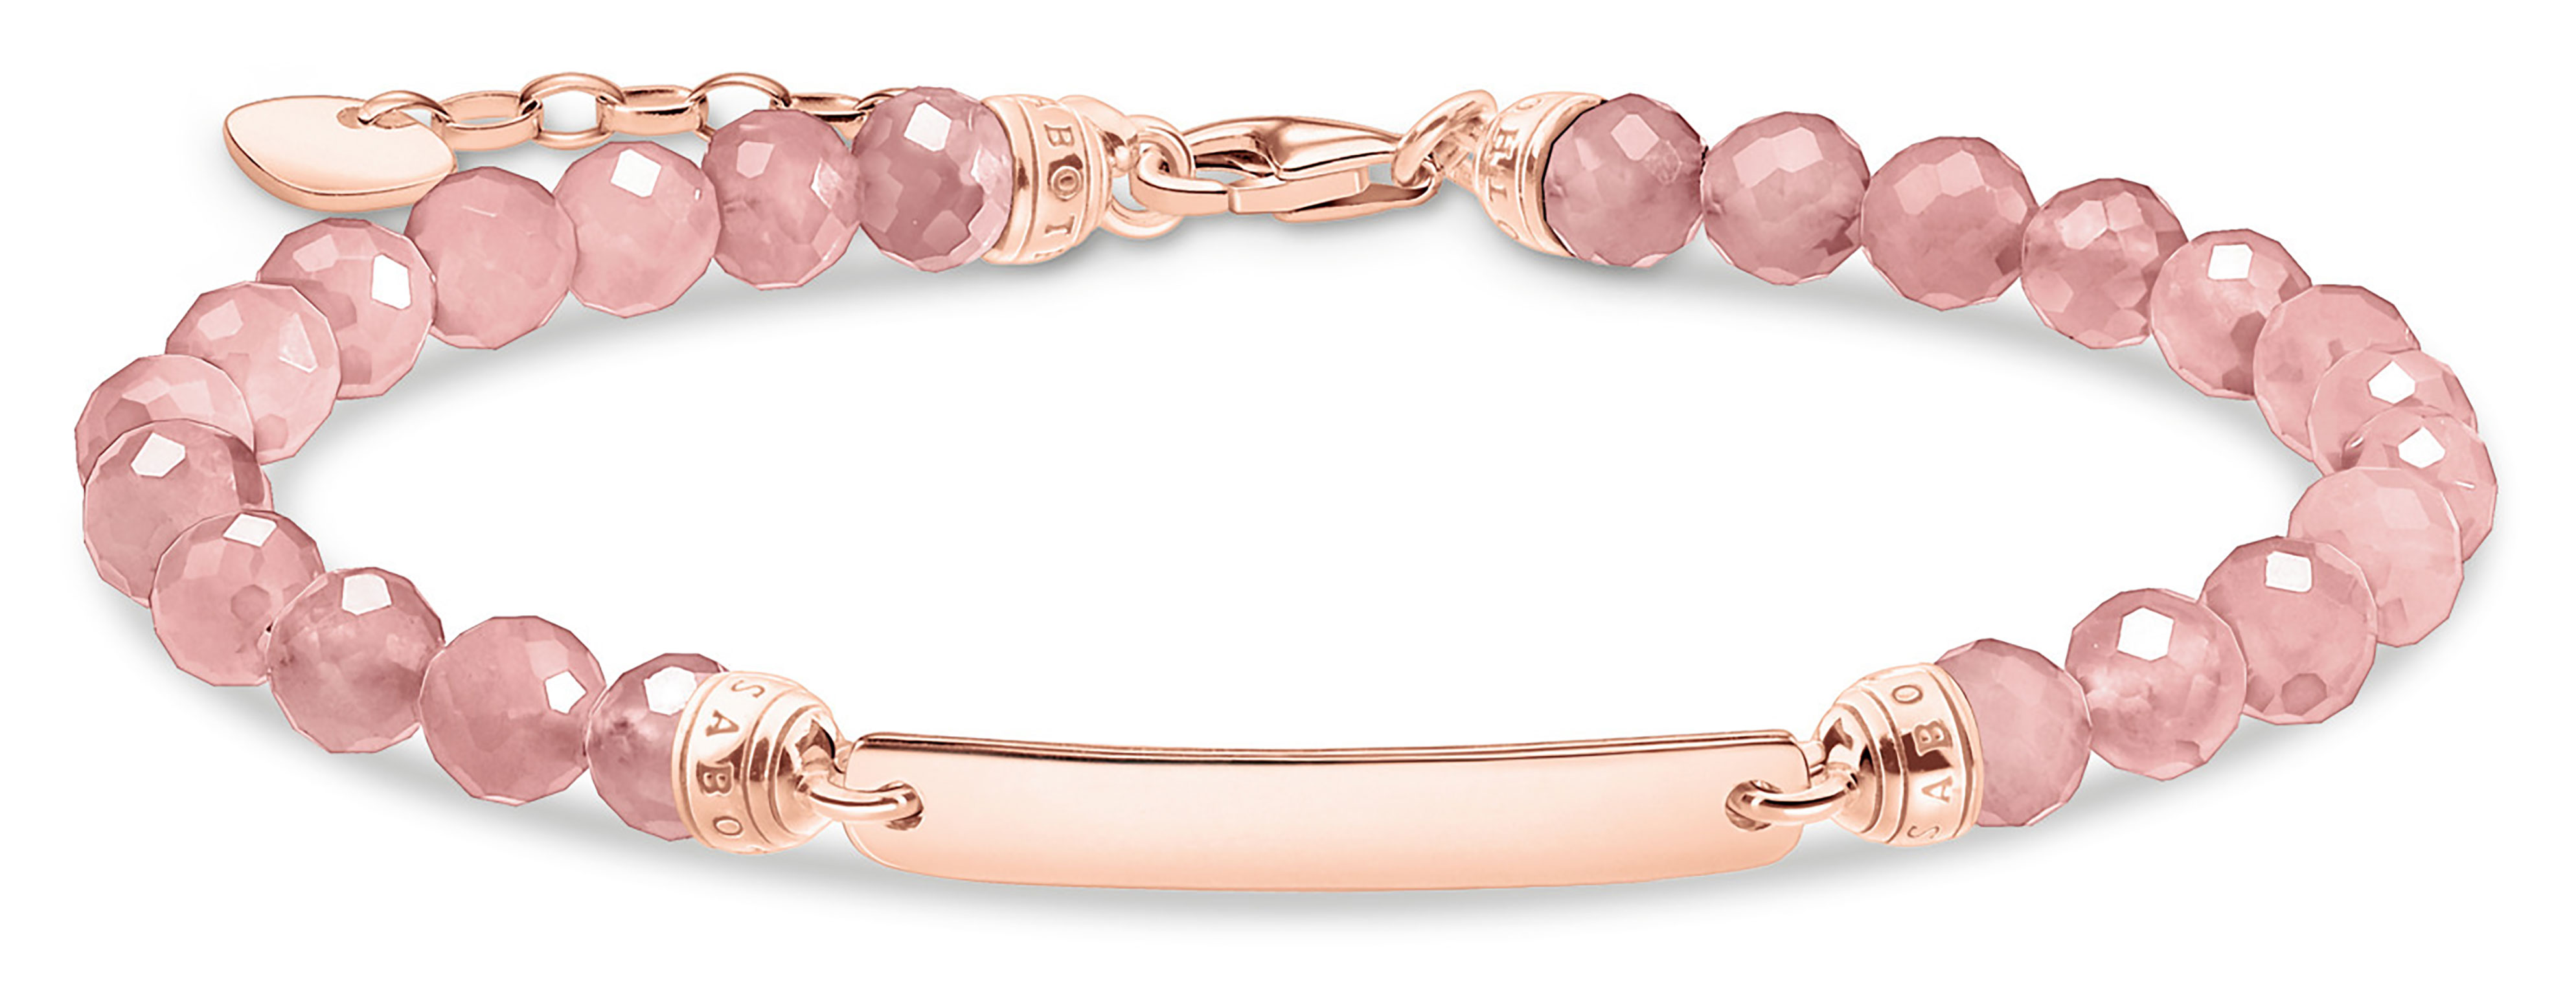 Thomas Sabo Pink Nylon Silver Heart Bracelet A1996-173-19-L20V - First  Class Watches™ IRL